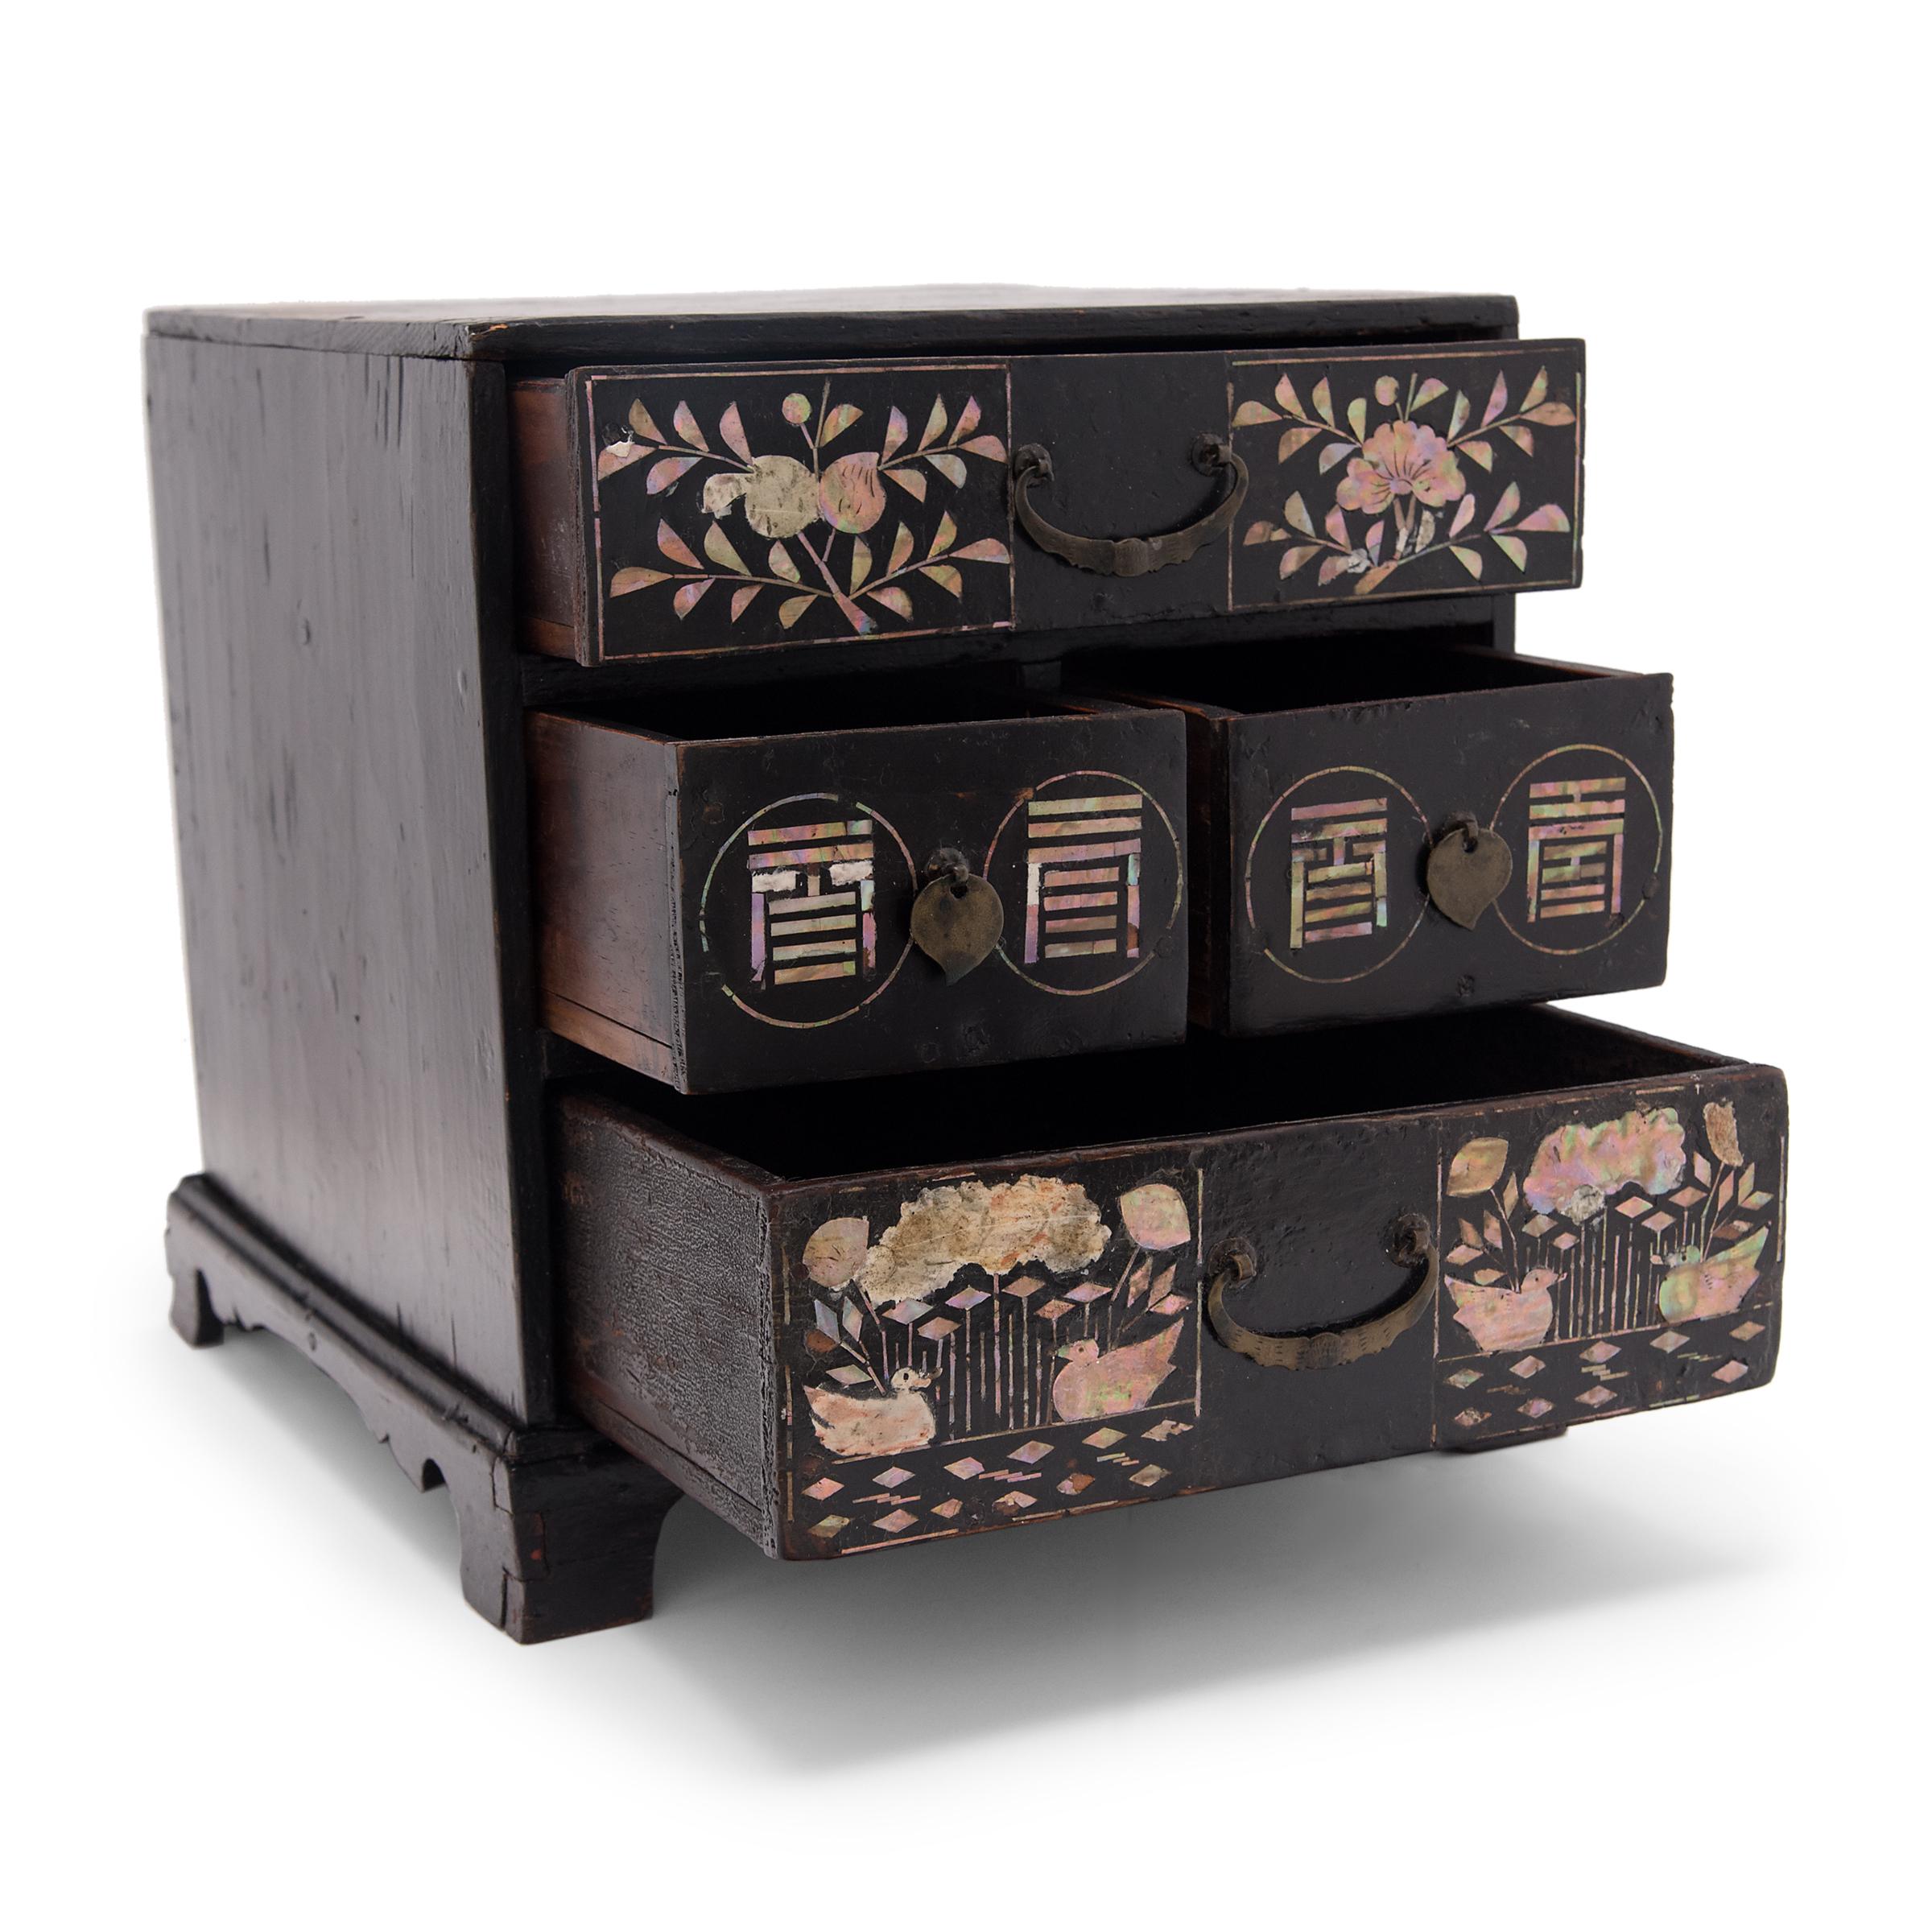 Dated to the early 20th century, this four-drawer table chest was likely used a jewelry box and is beautifully decorated with black lacquer inlaid with mother-of-pearl. The top drawer is patterned with elegant floral branches and the bottom drawer